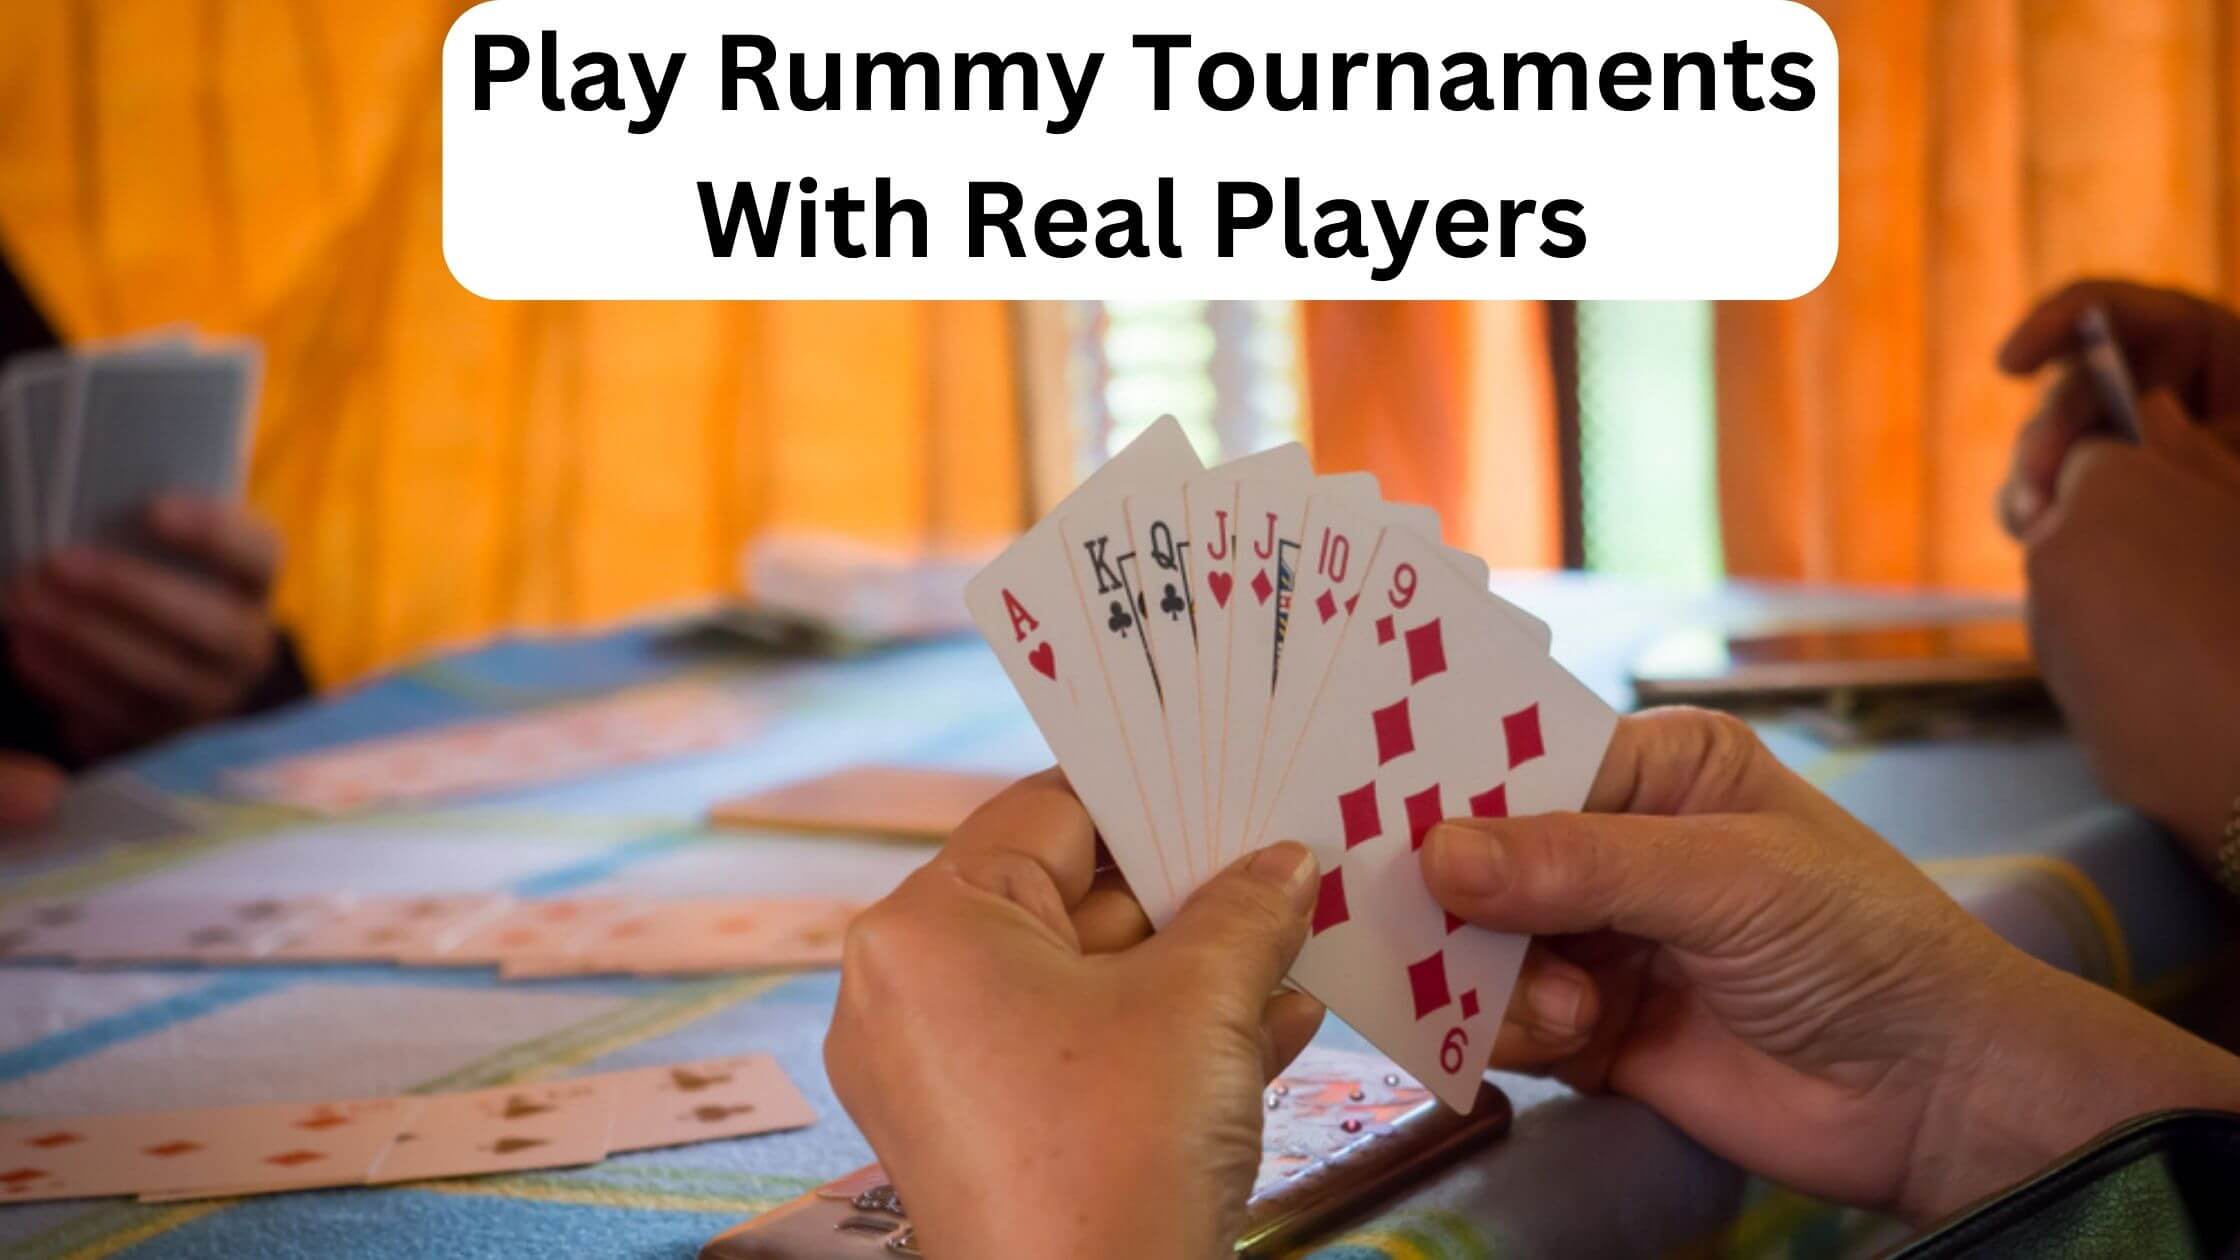 Play rummy tournaments